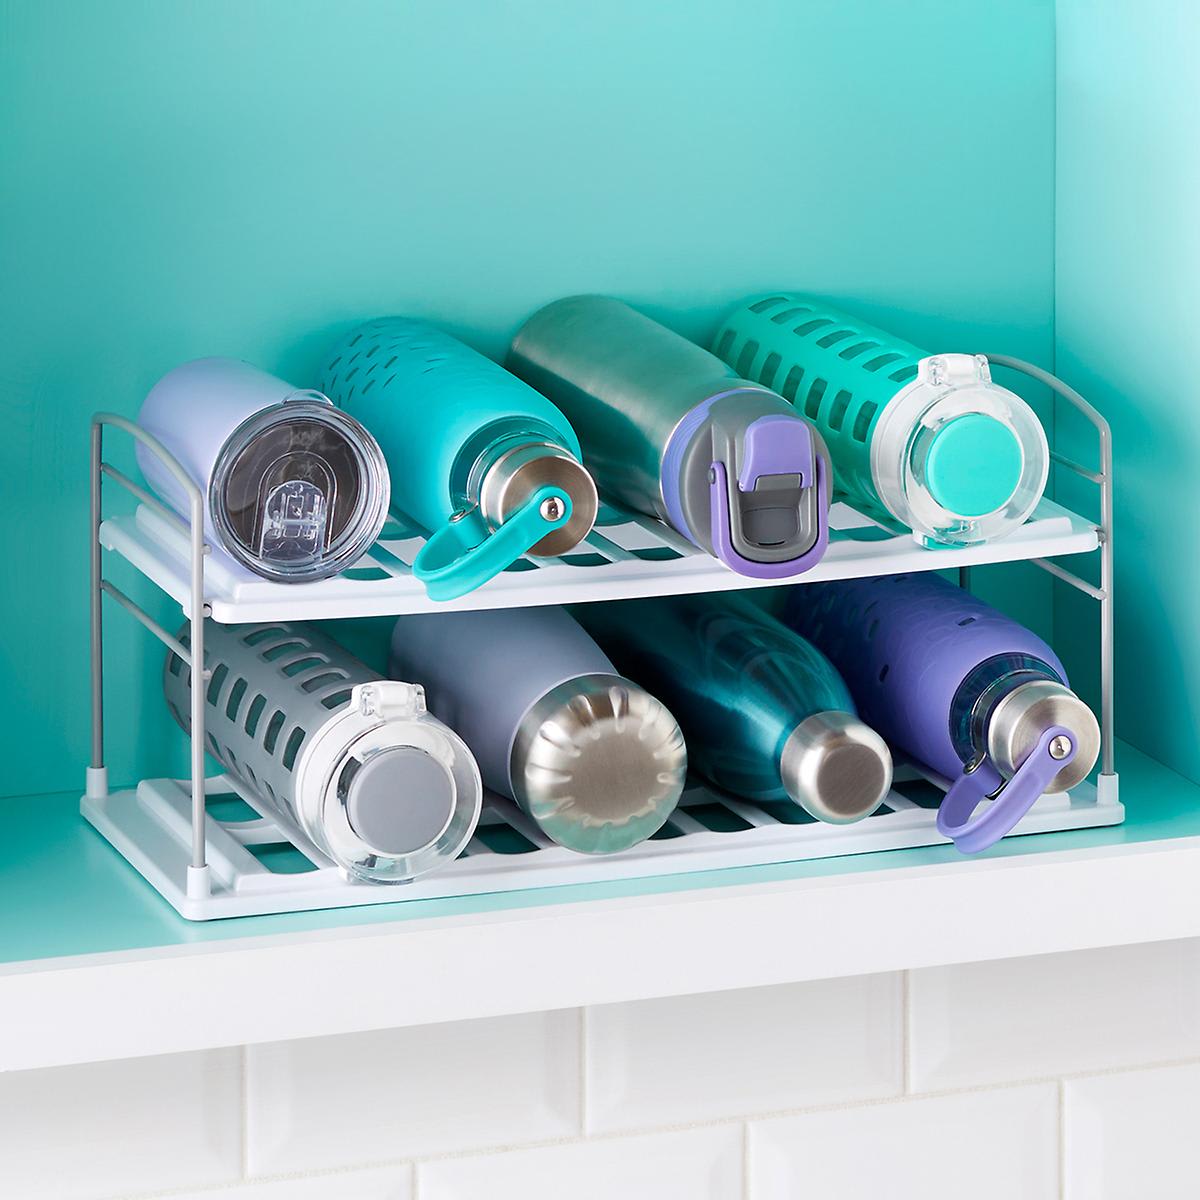 The 15 best products for organizing above your kitchen sink